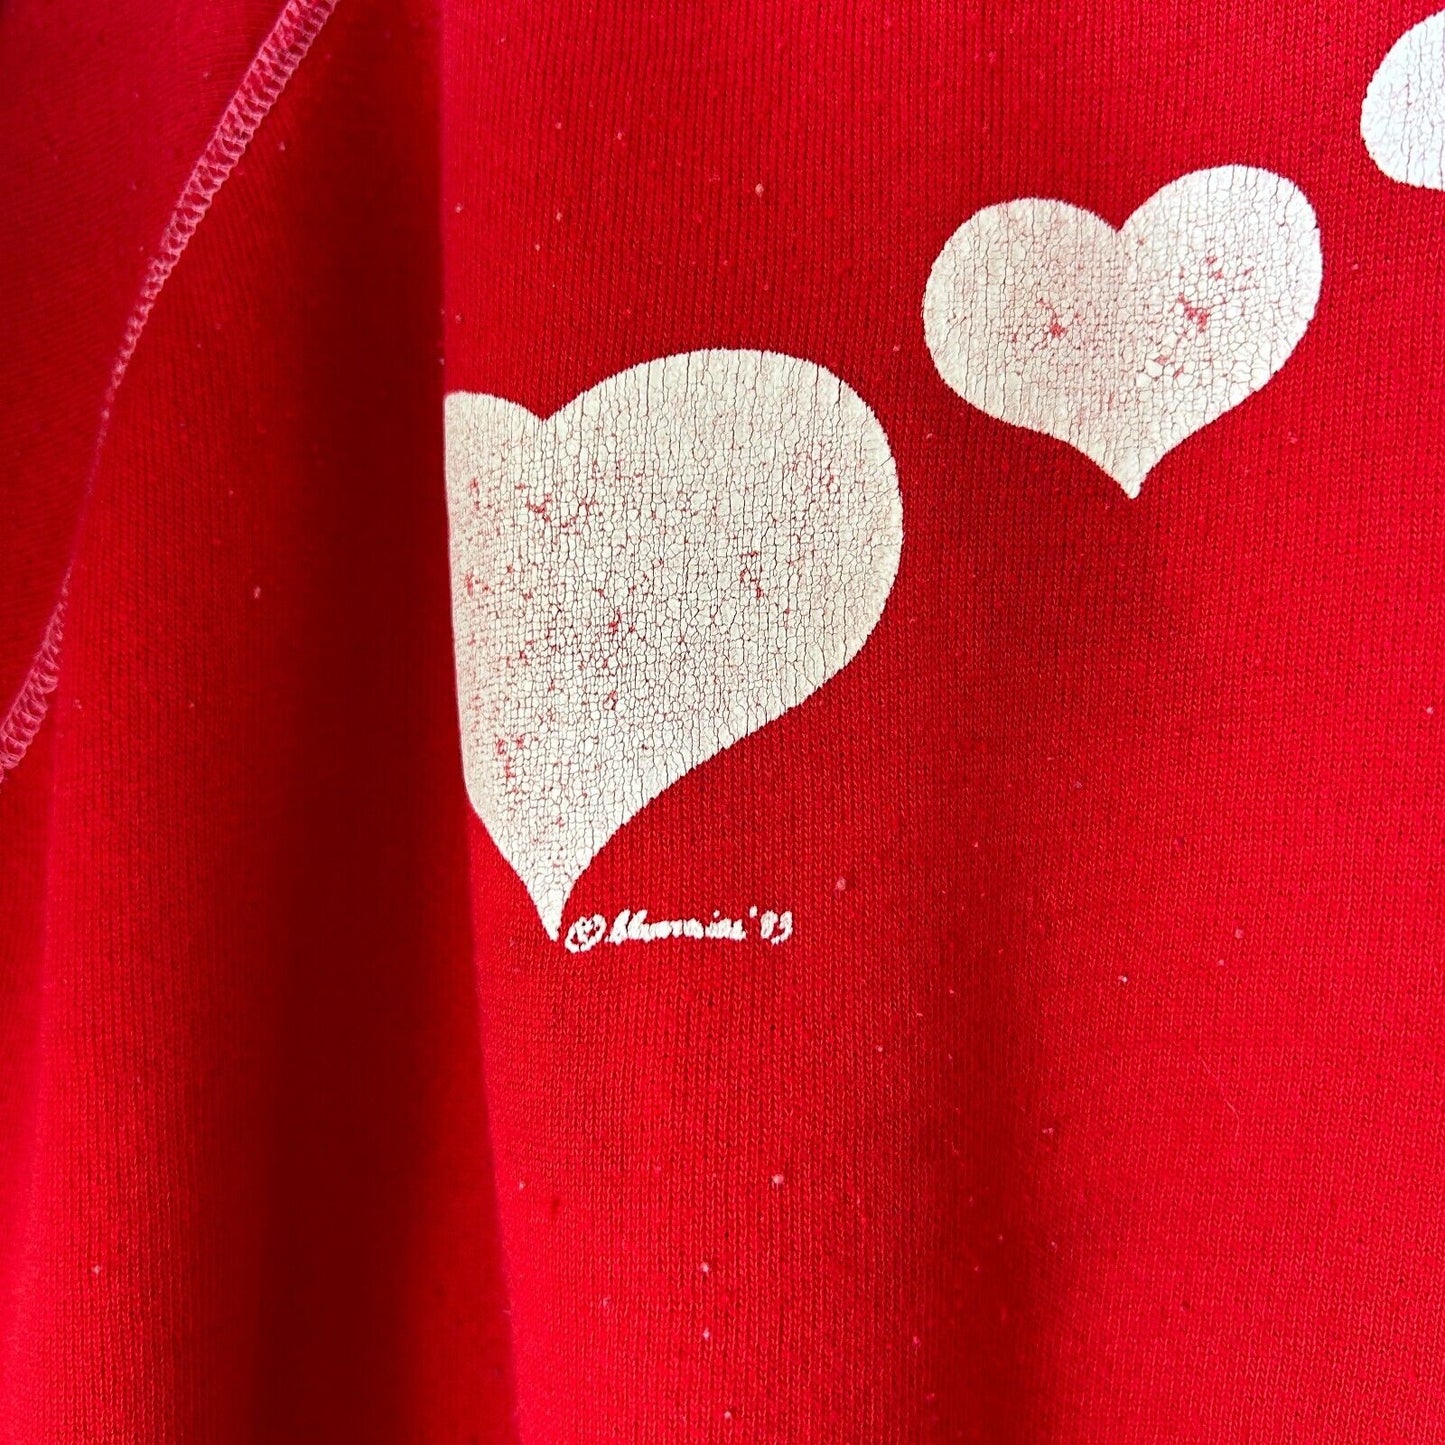 VINTAGE 80s | Flying Hearts Red Crewneck Sweater sz L Adult